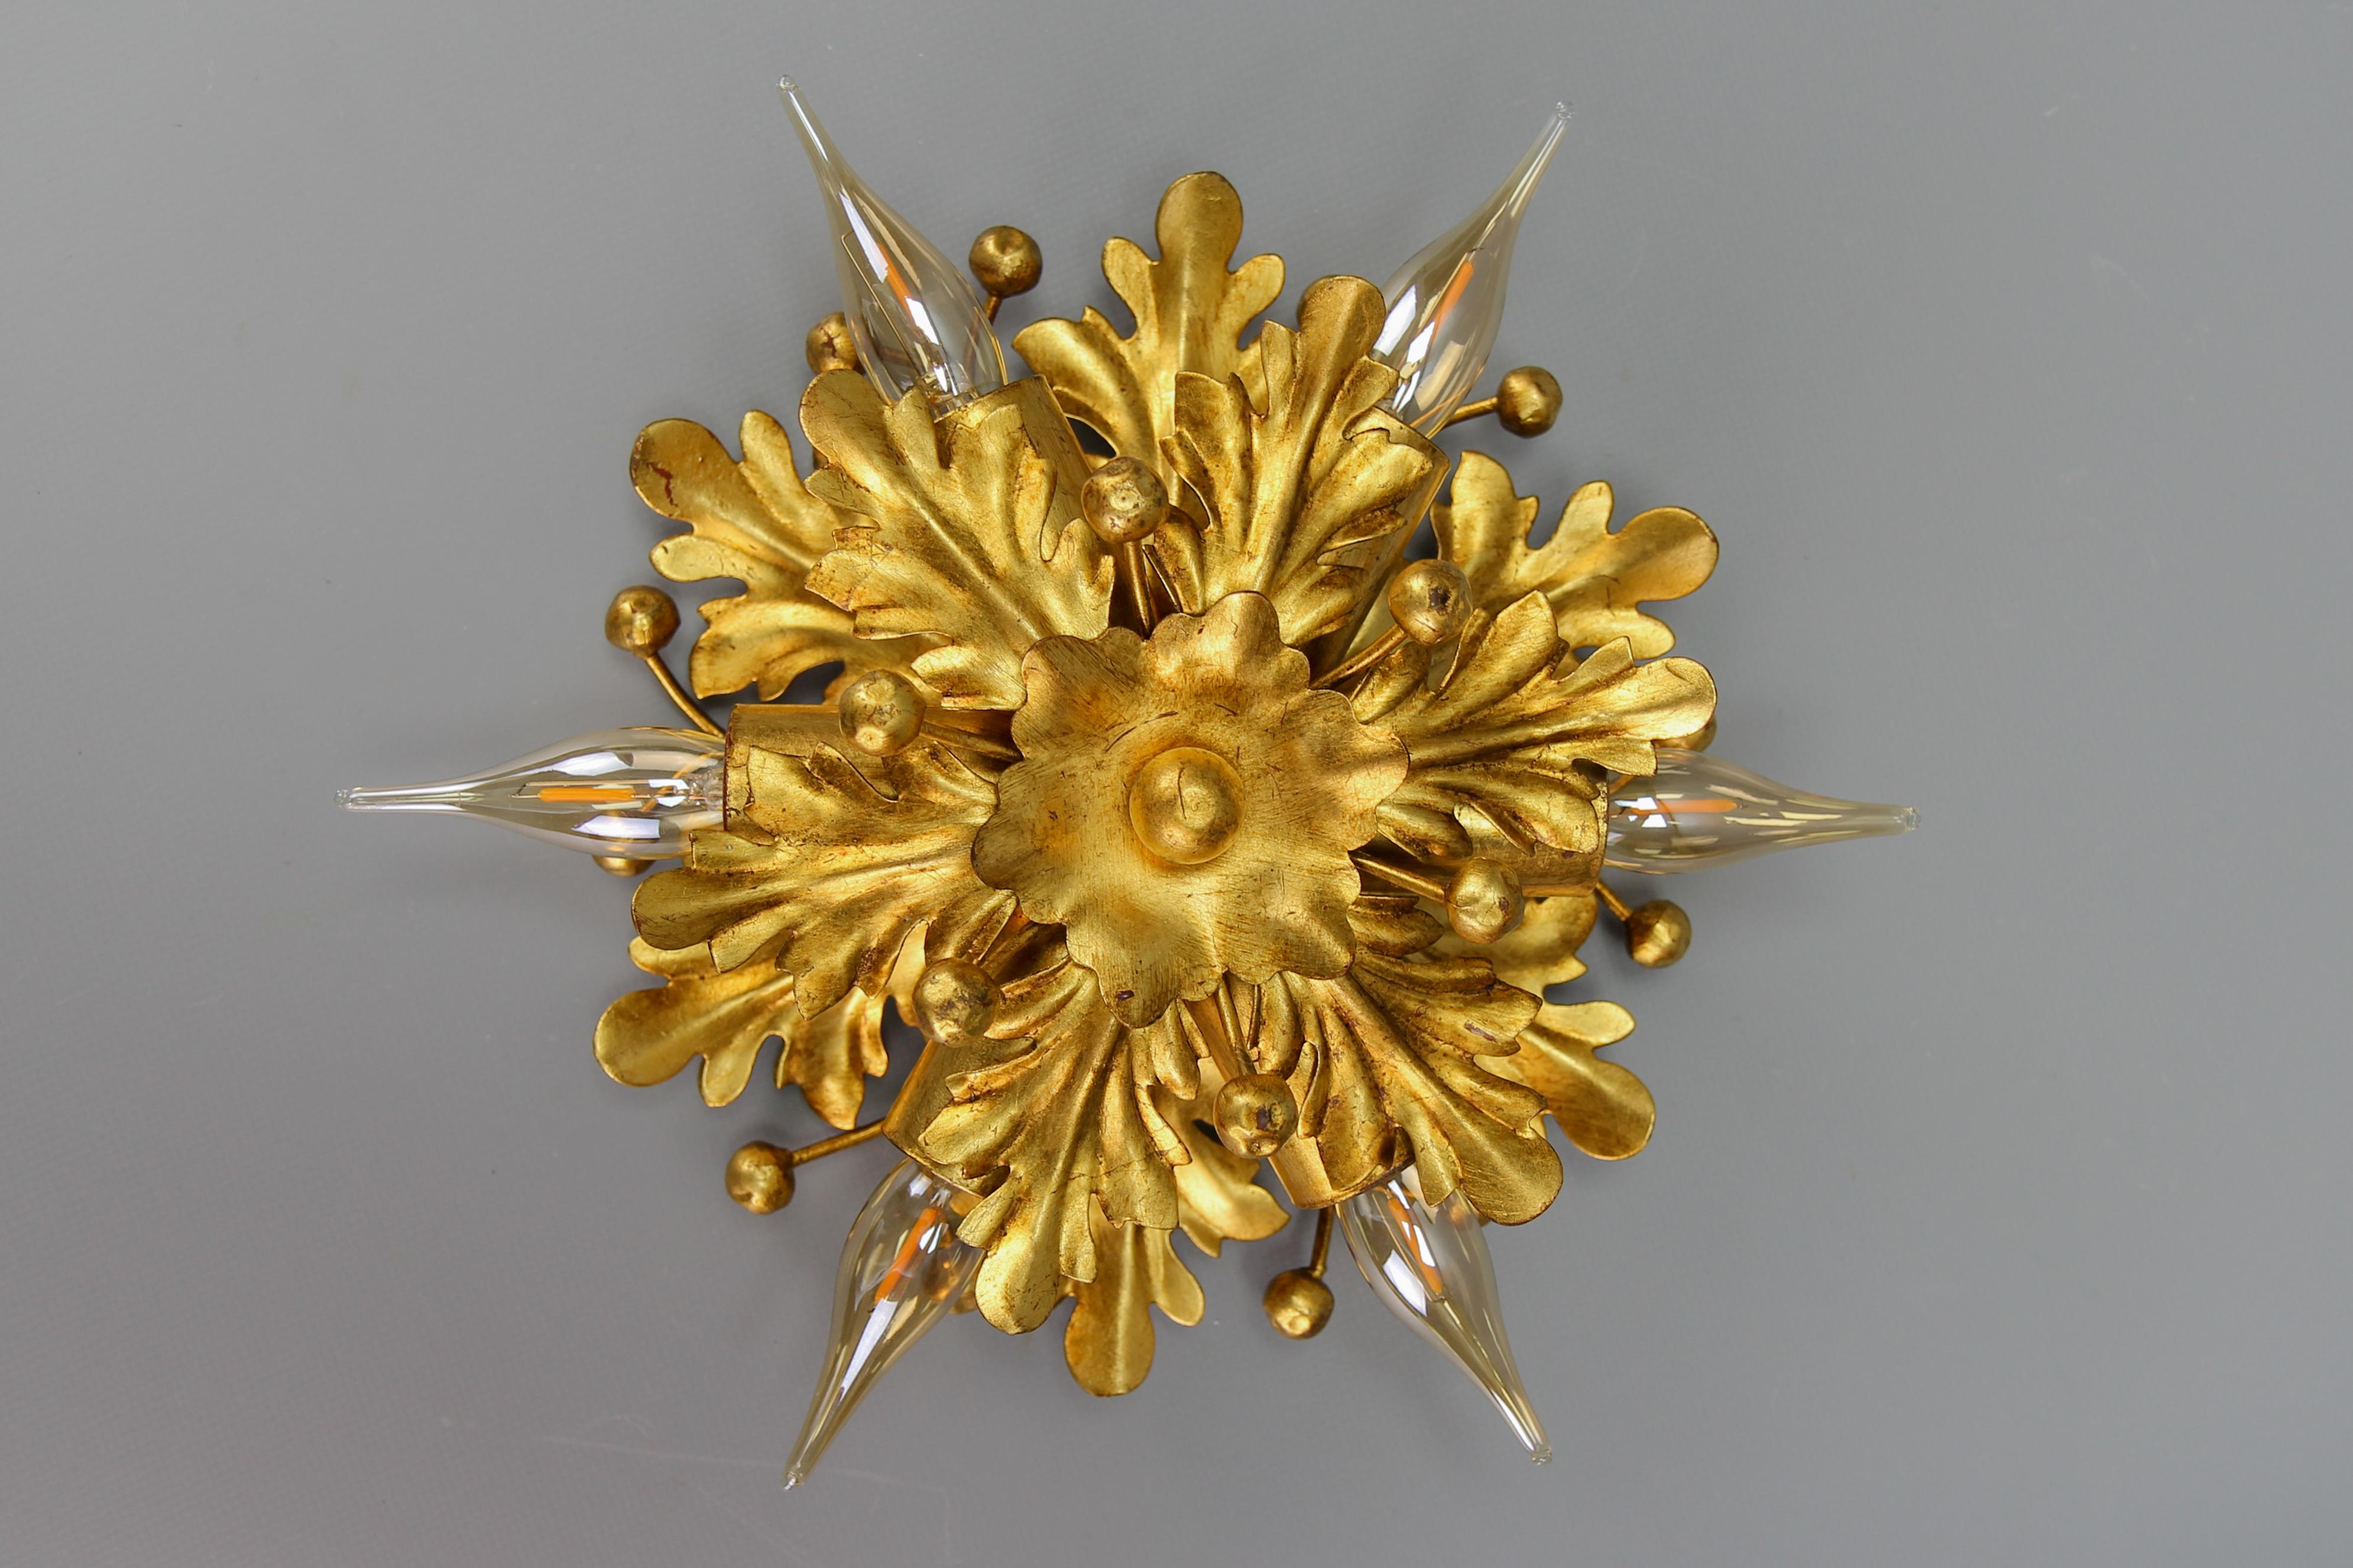 Hollywood Regency style gilt metal sunburst-shaped leaf motif flush mount or sconce by Hans Möller, circa the 1970s.
A beautiful Hollywood Regency-style gilt metal sunburst-shaped six-light wall lamp, adorned with elegantly shaped leaves and small